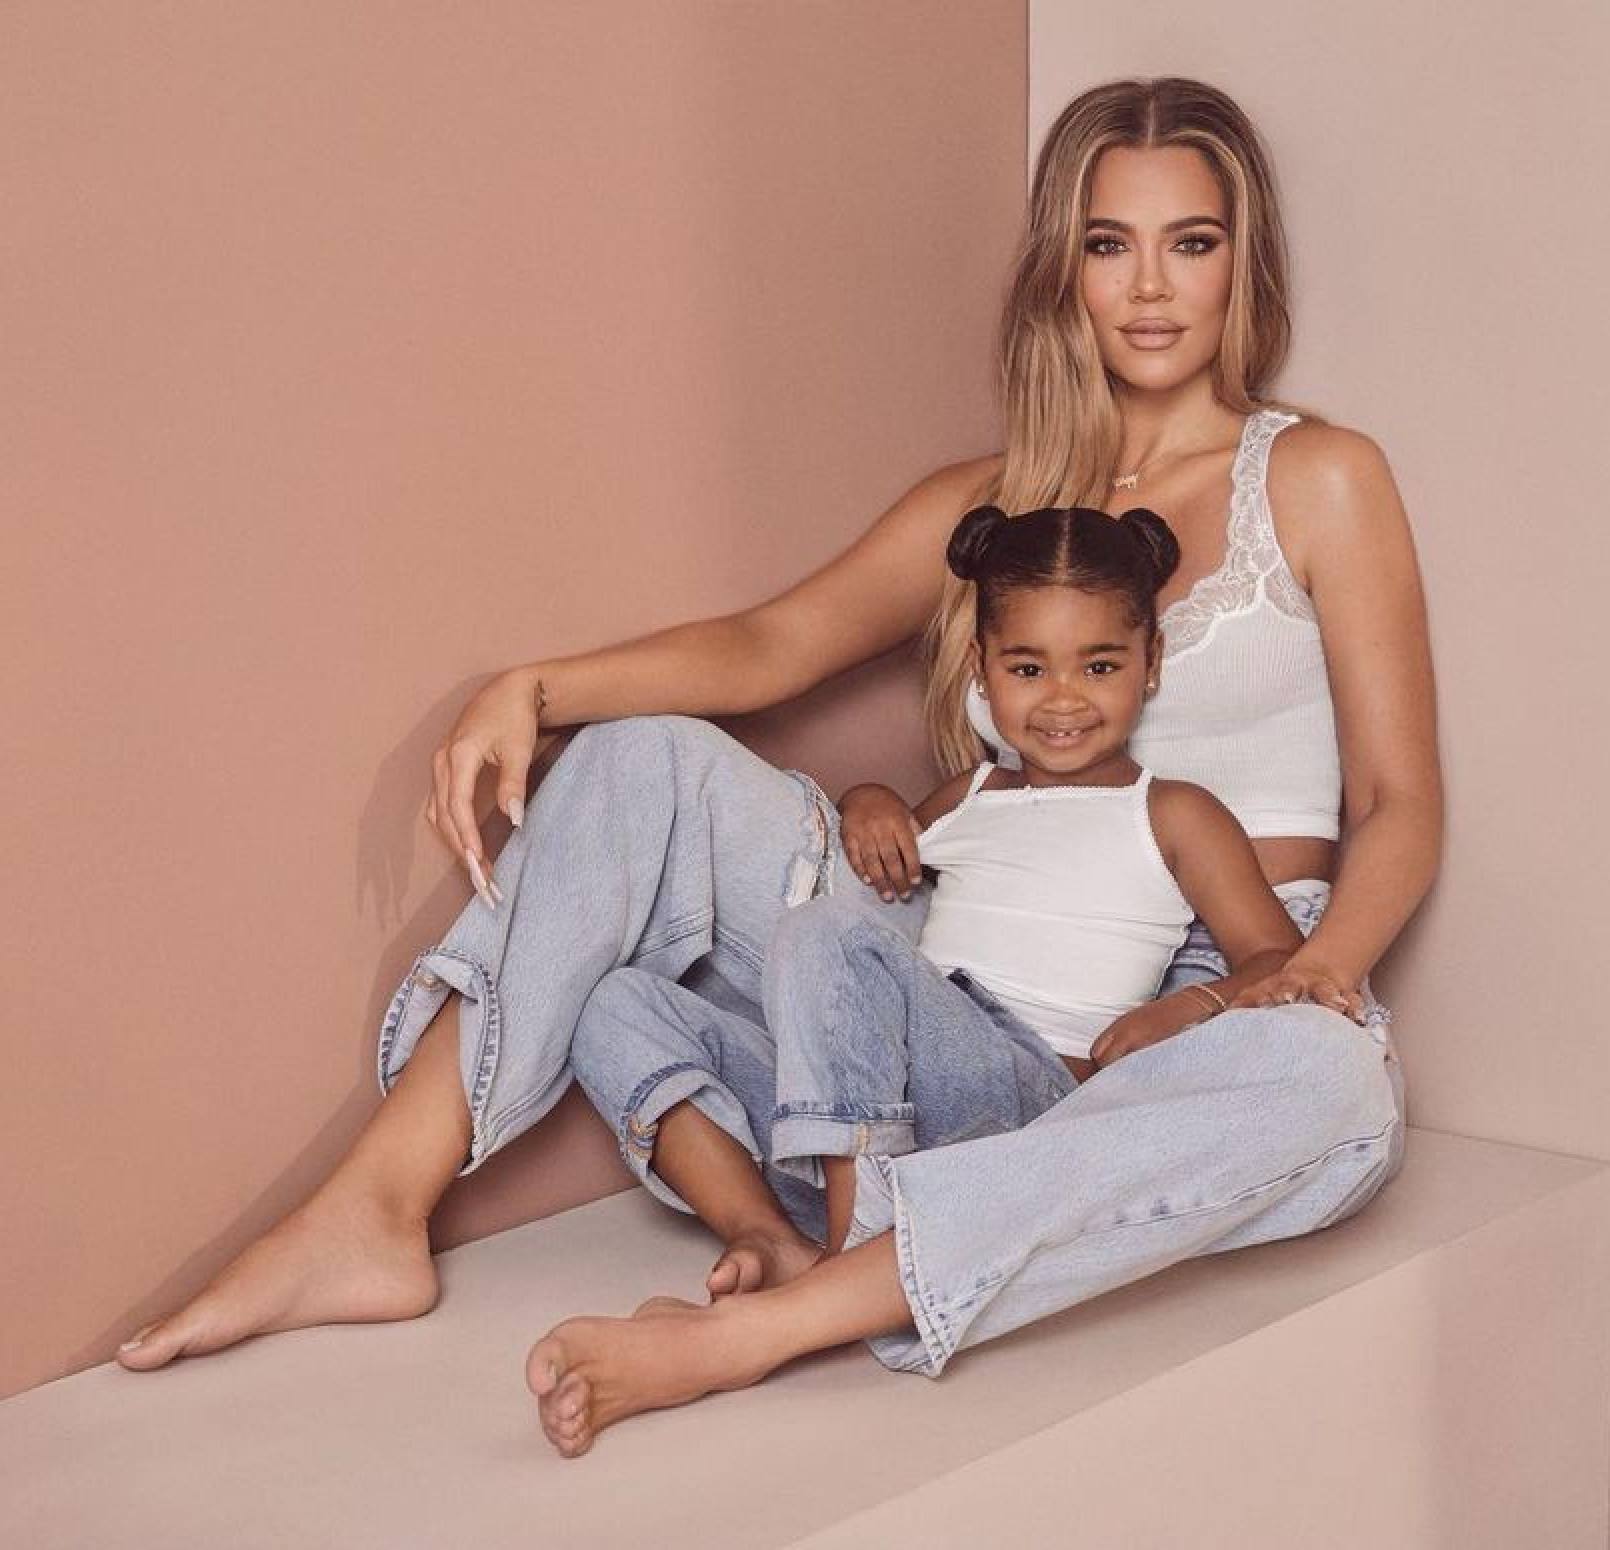 Khloe Kardashian and Baby True Have a Mommy-Daughter Photo Shoot